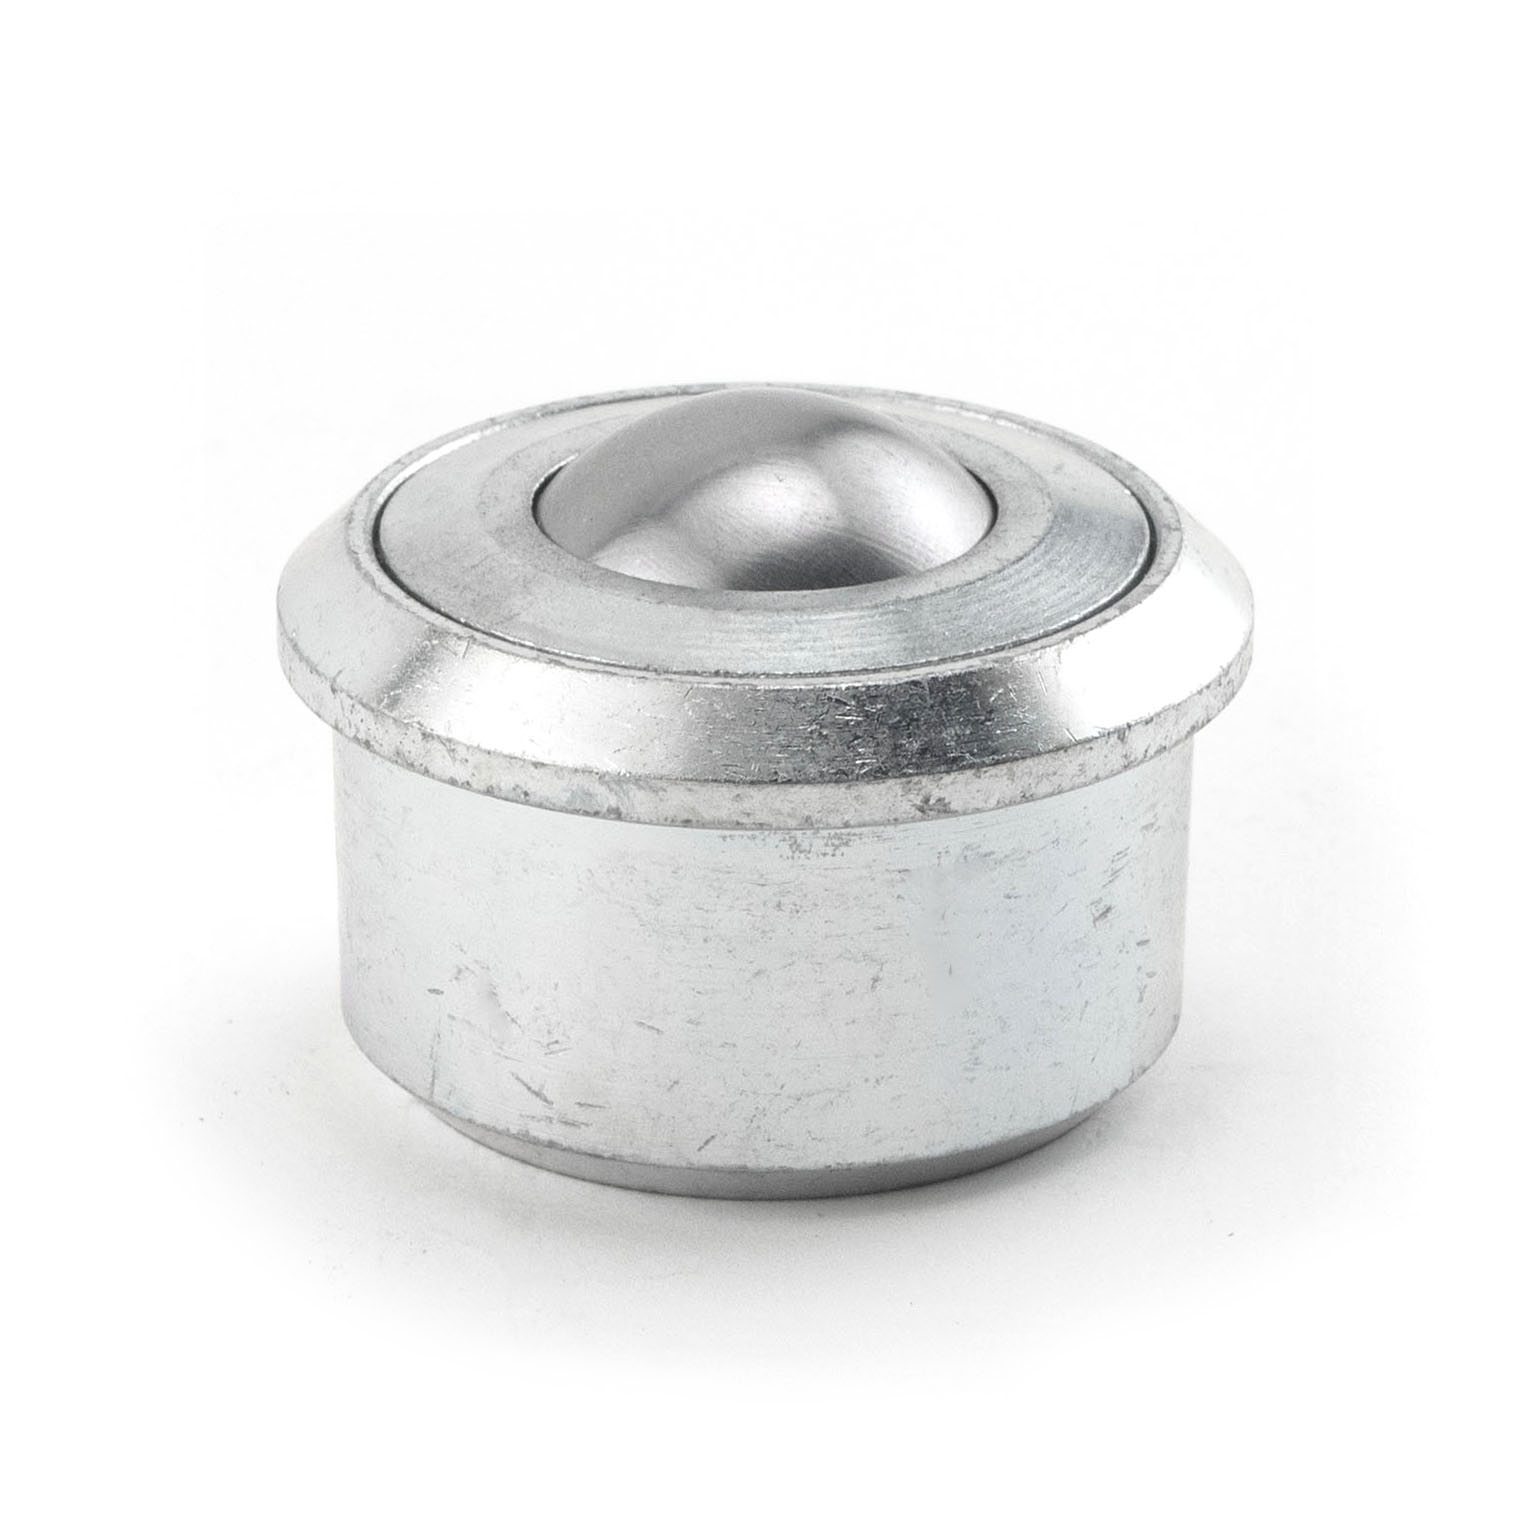 Ball Transfer; 1-3/16" Stainless Steel ball; Round Drop-in Base (1-3/4" x15/16"); Stainless Steel housing; 750#; 17/32" load height (Item #88835)